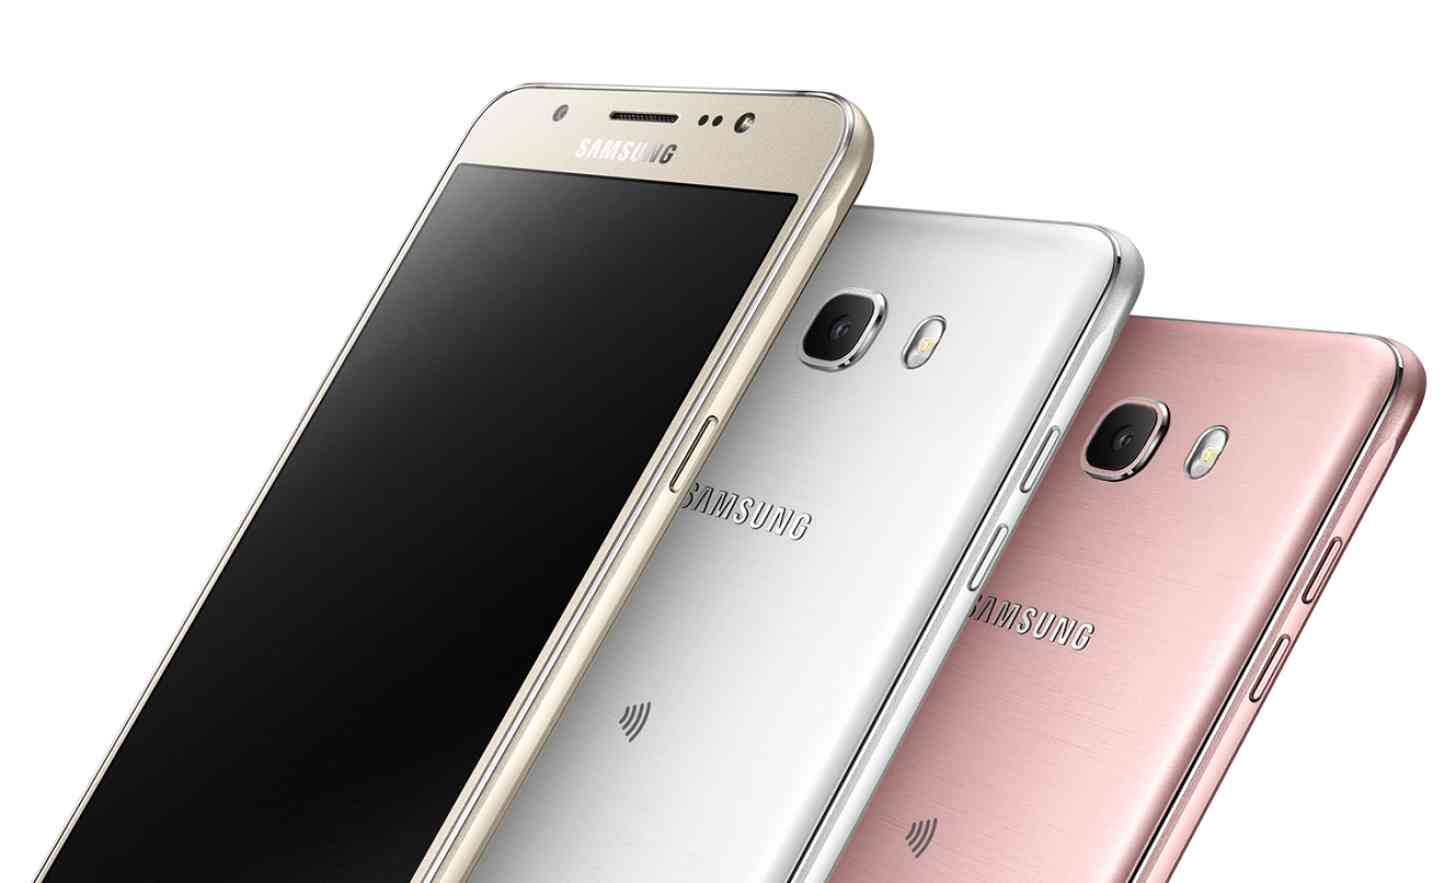 Samsung Galaxy J7 (2016) official colors